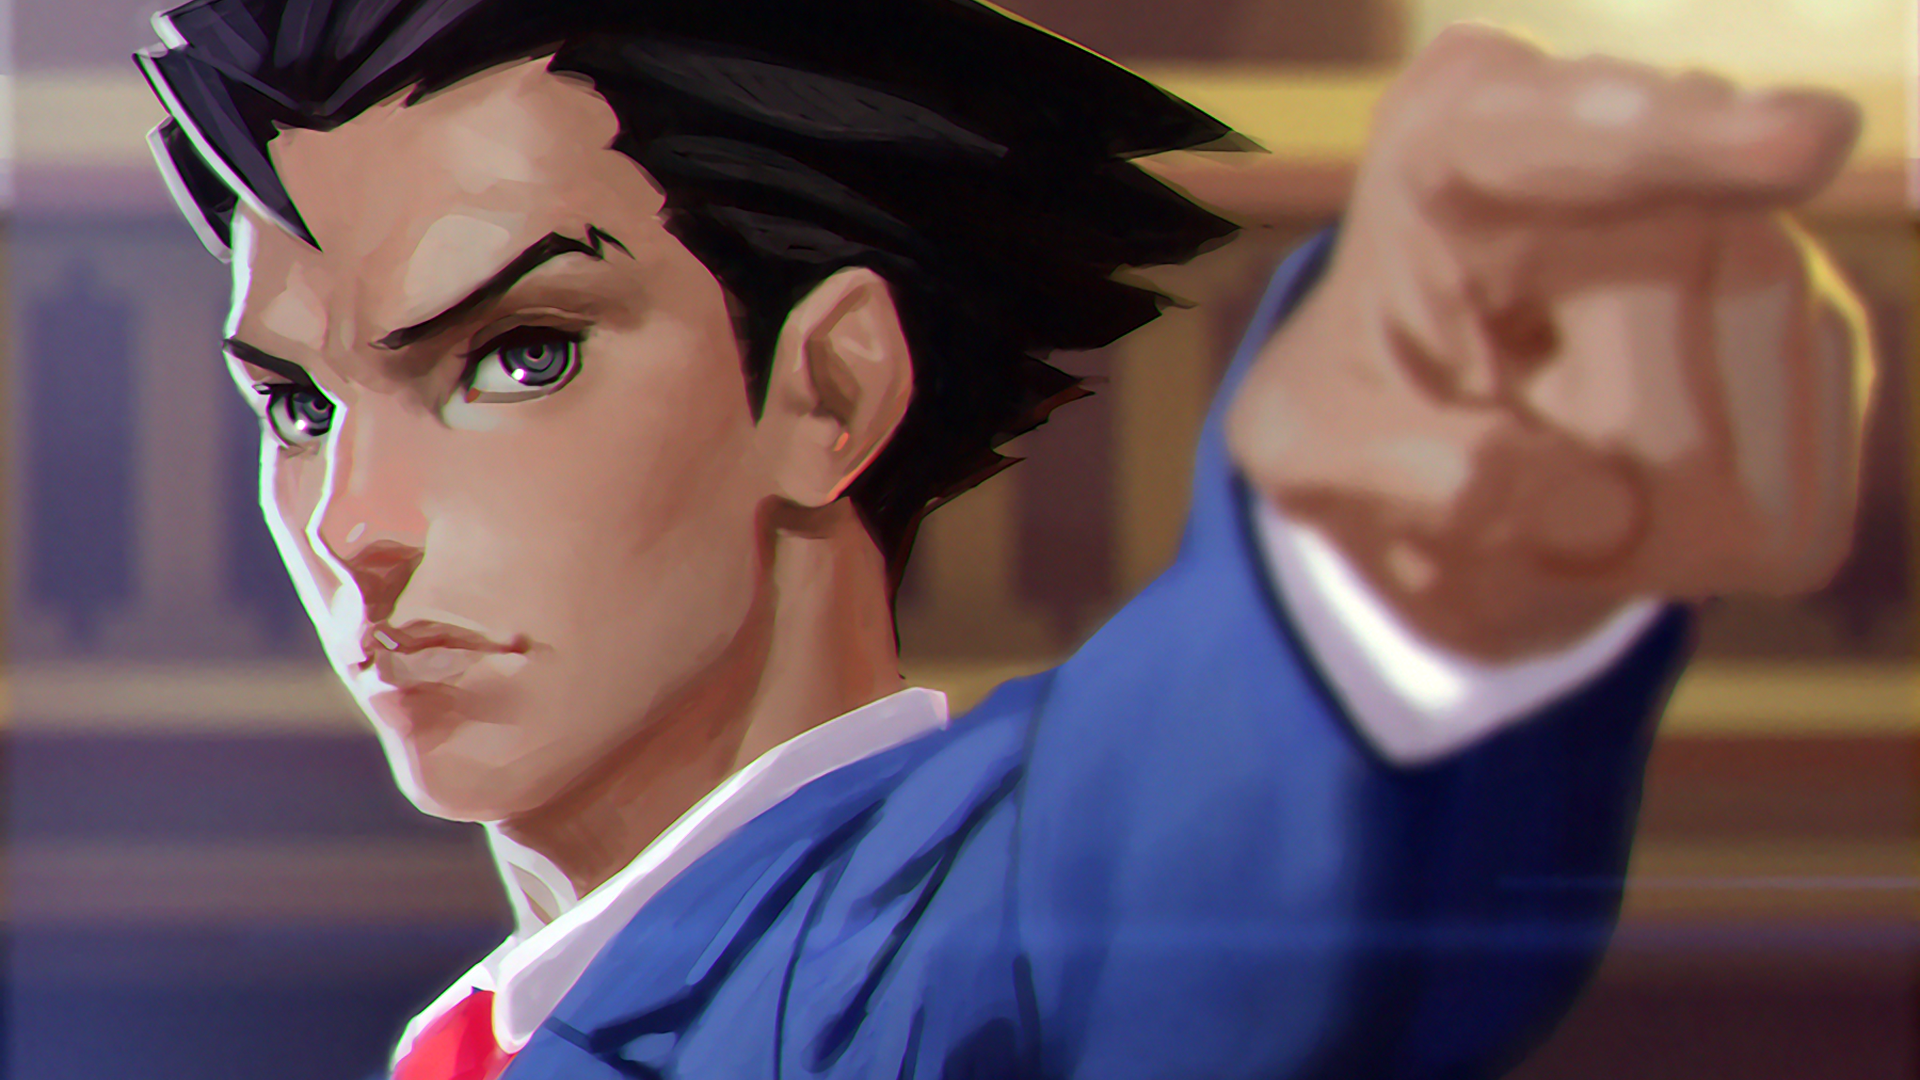 Video Game Phoenix Wright: Ace Attorney HD Wallpaper | Background Image